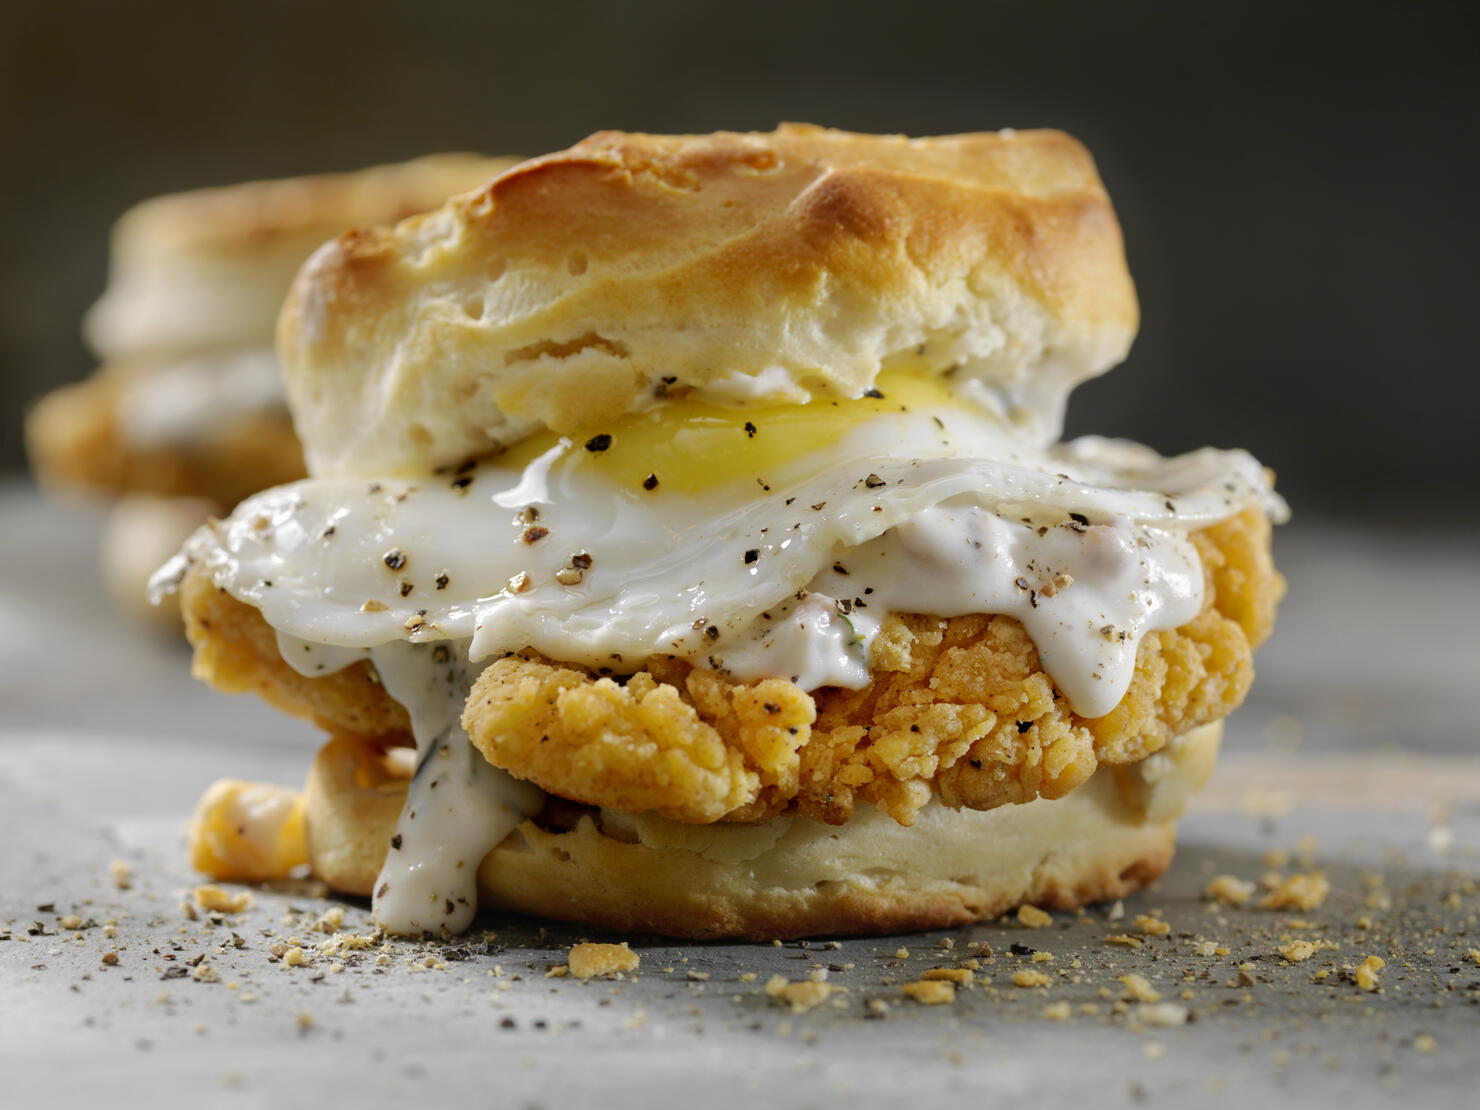 Fried Chicken Sandwich with a Fried Egg,Sausage Gravy on a Biscuit